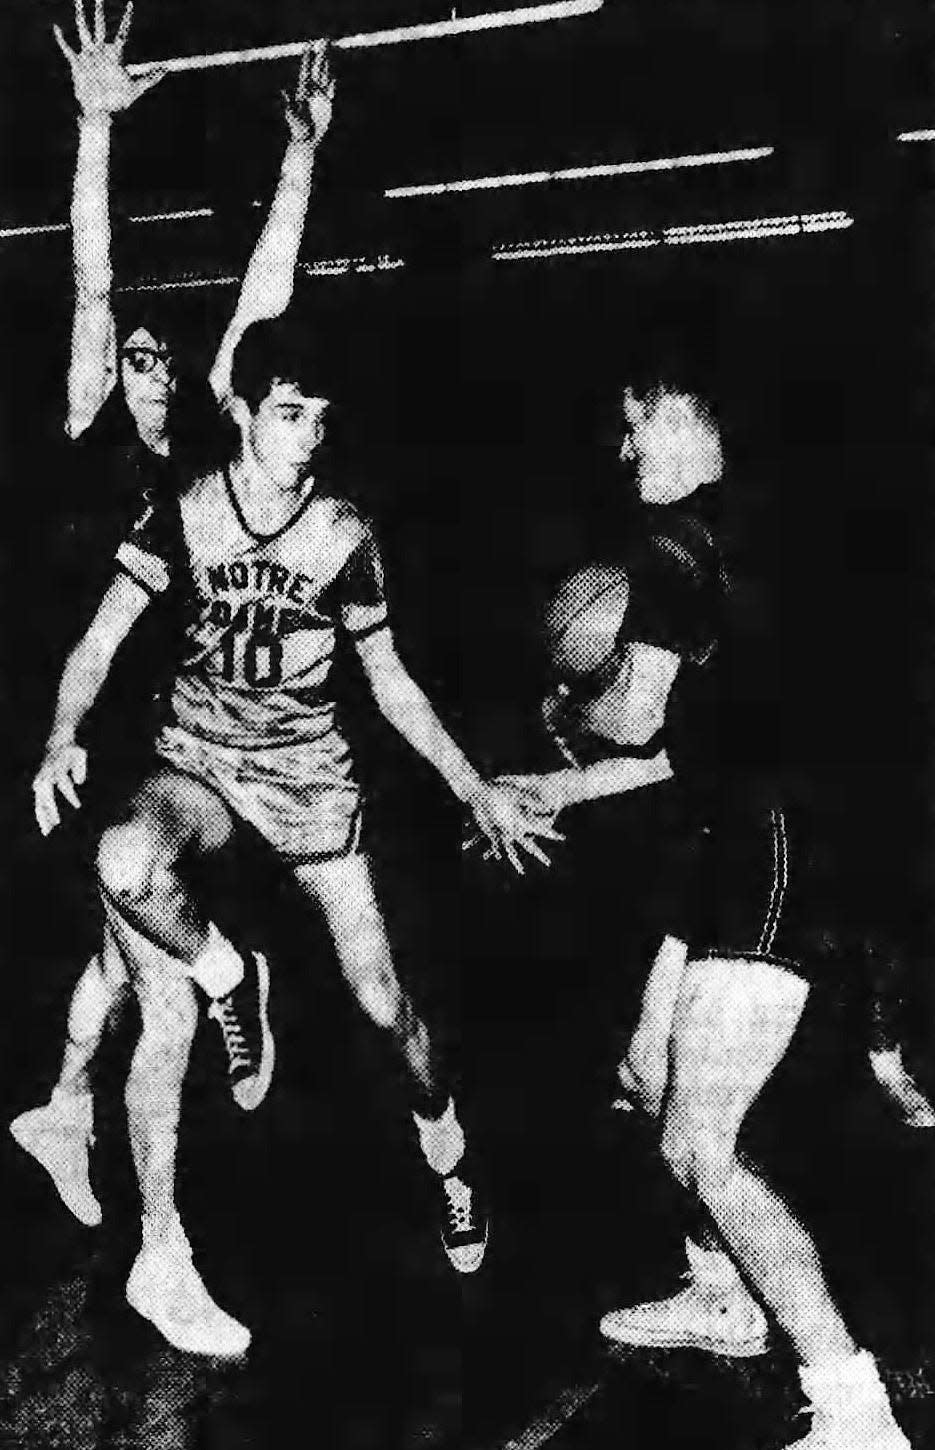 Elmira Notre Dame's Bill Huddle (10) plays against Elkland in a 1966 boys basketball game. Pictured at right is Mike Egleston, who went on to coach the Elkland girls basketball team to a Pennsylvania state championship in 1996.